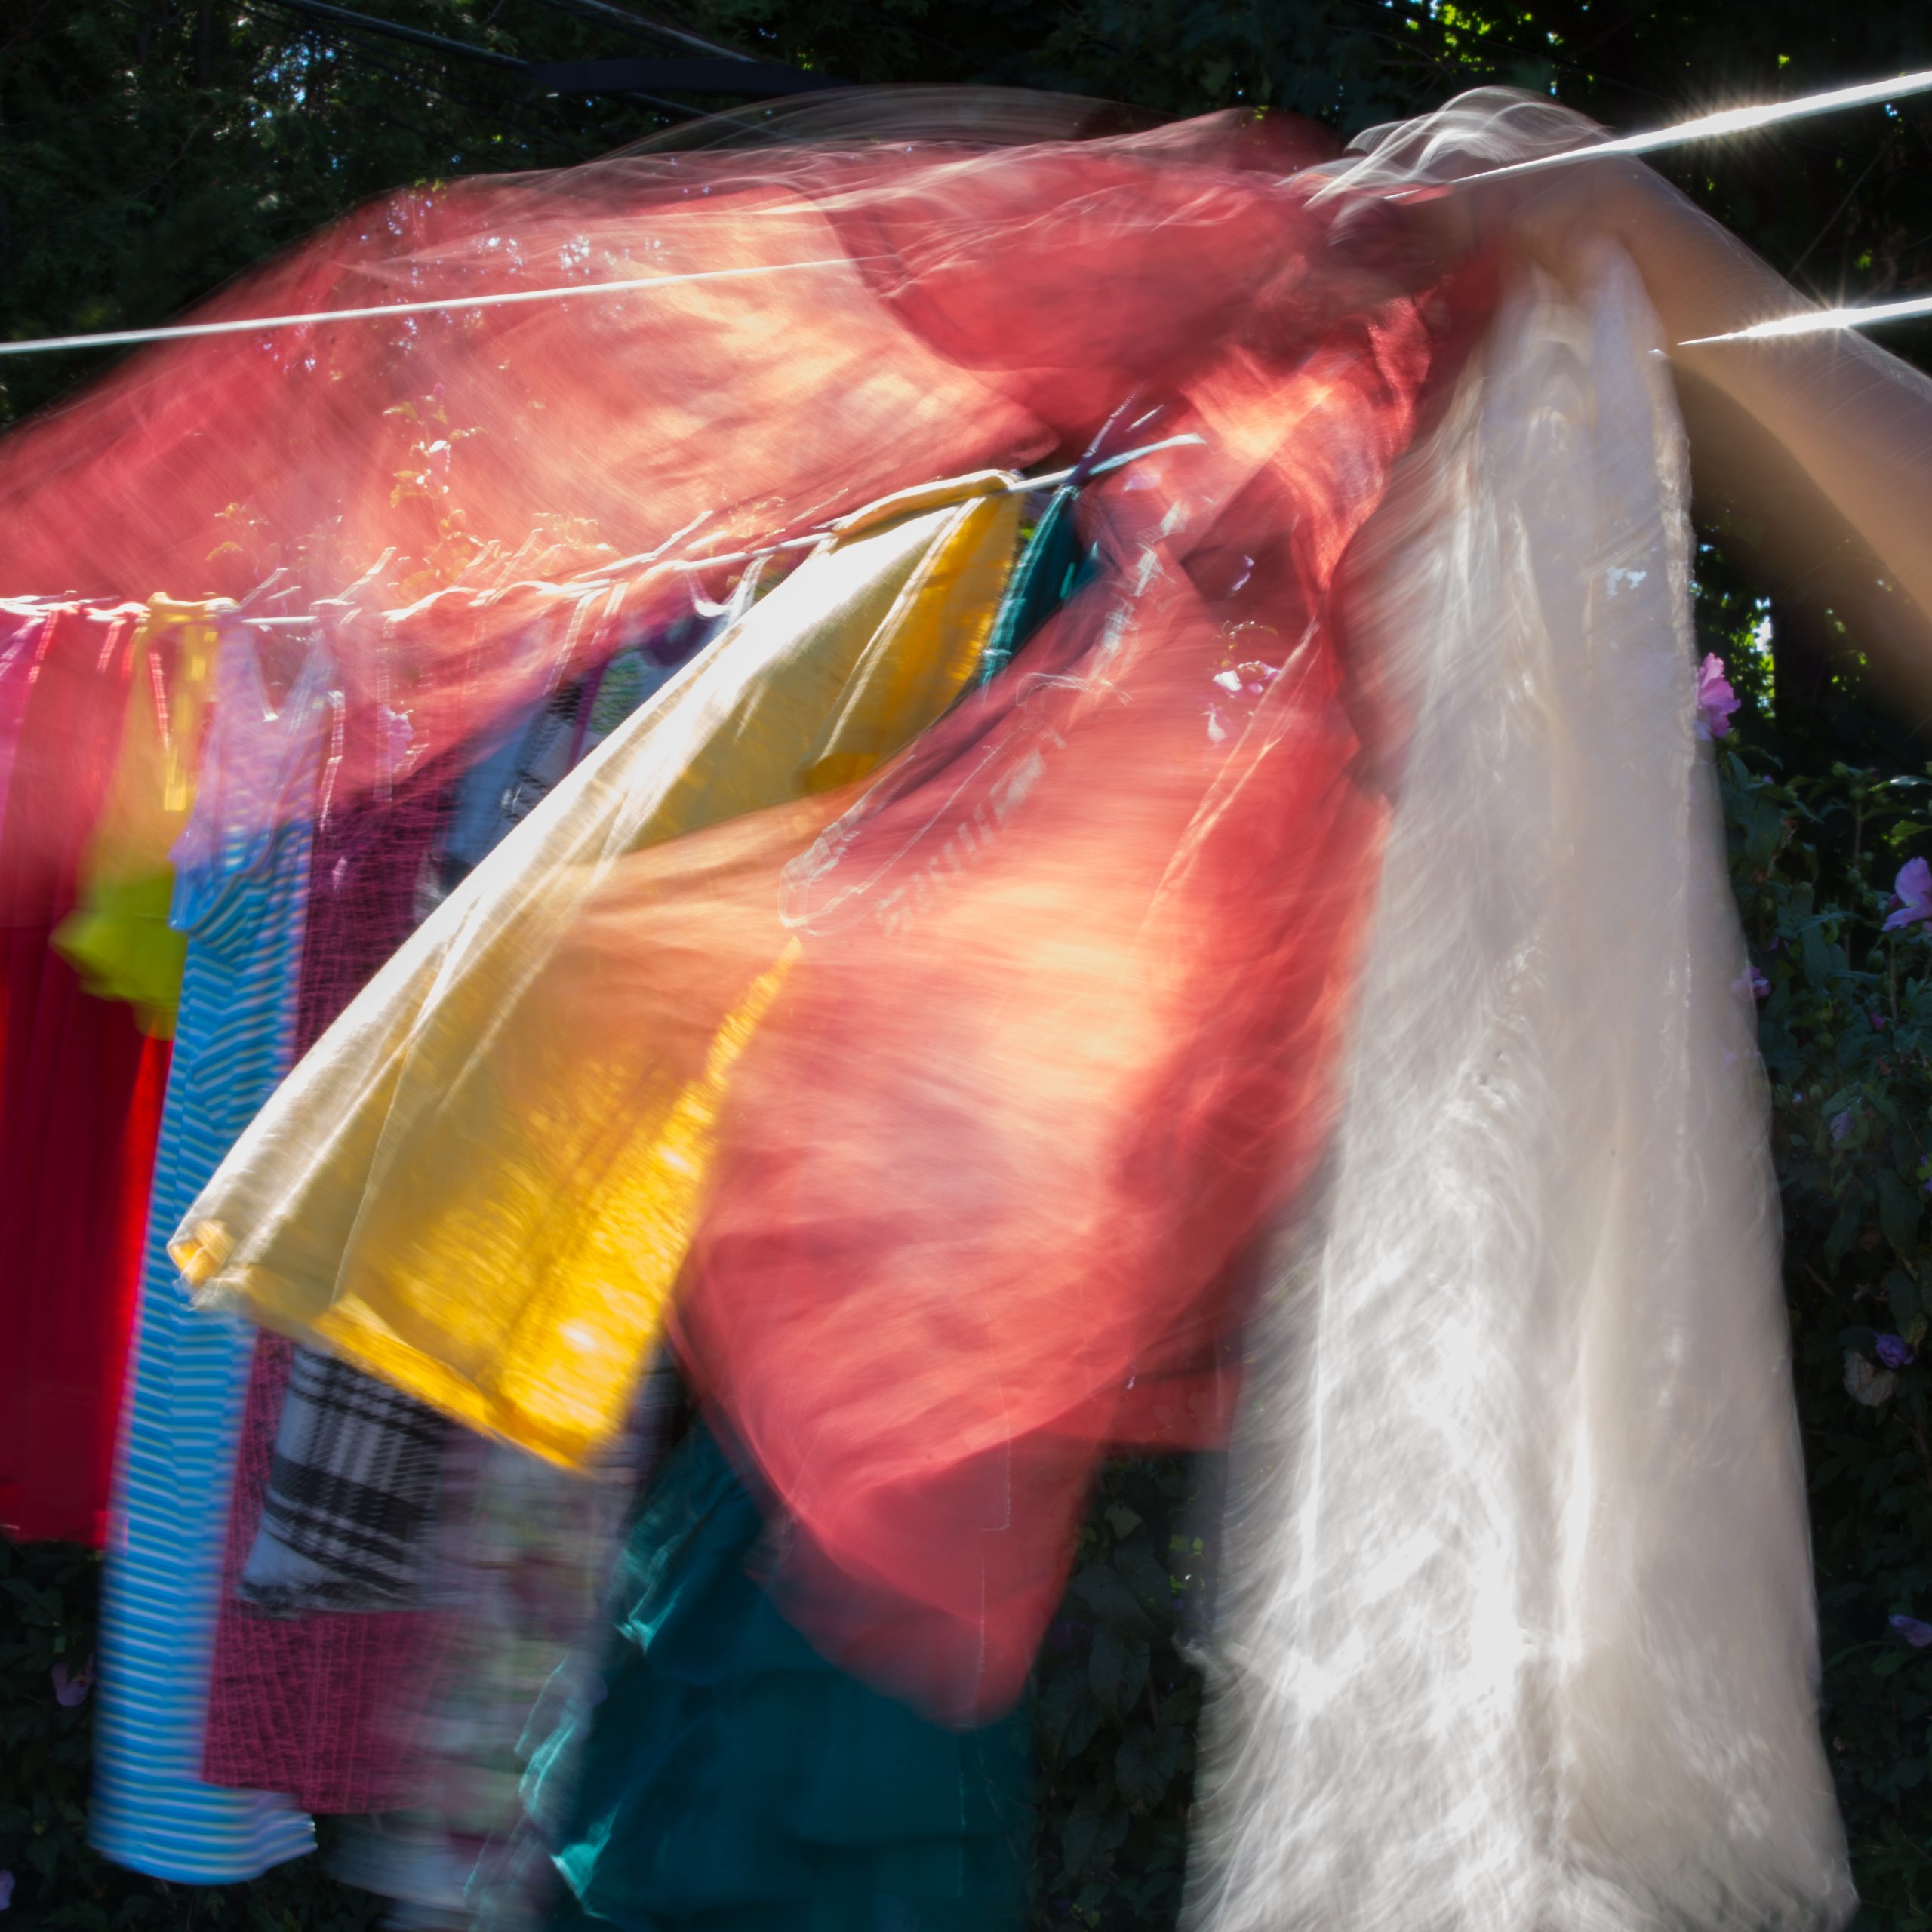 Pinning (from The Laundry Series) 2014, C-print, 12in x 12in